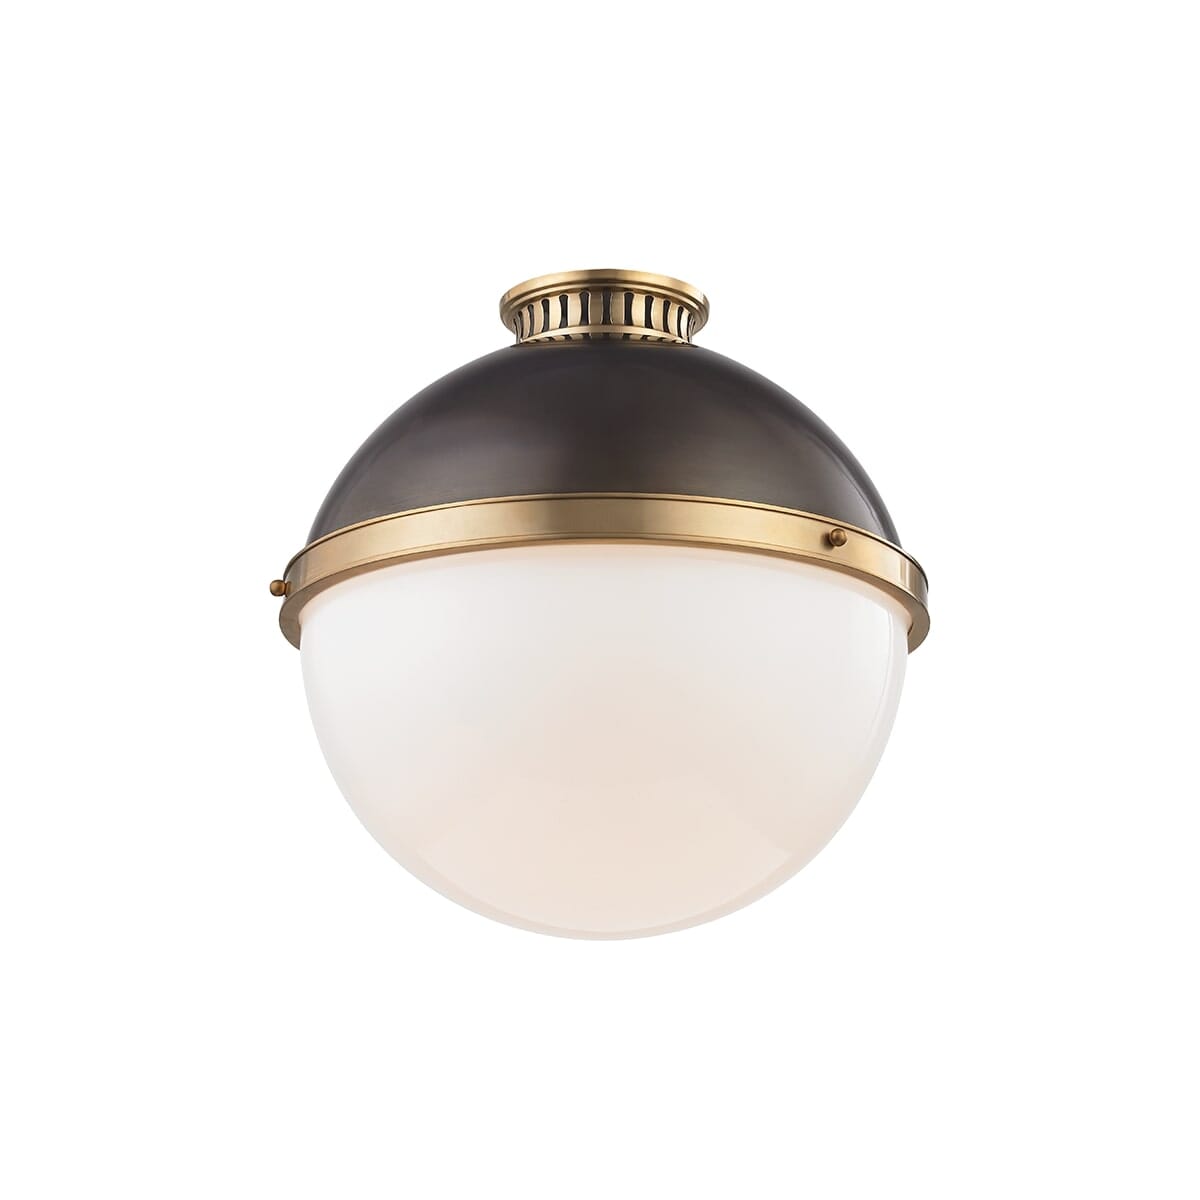 Latham Ceiling Light in Aged Distressed Bronze